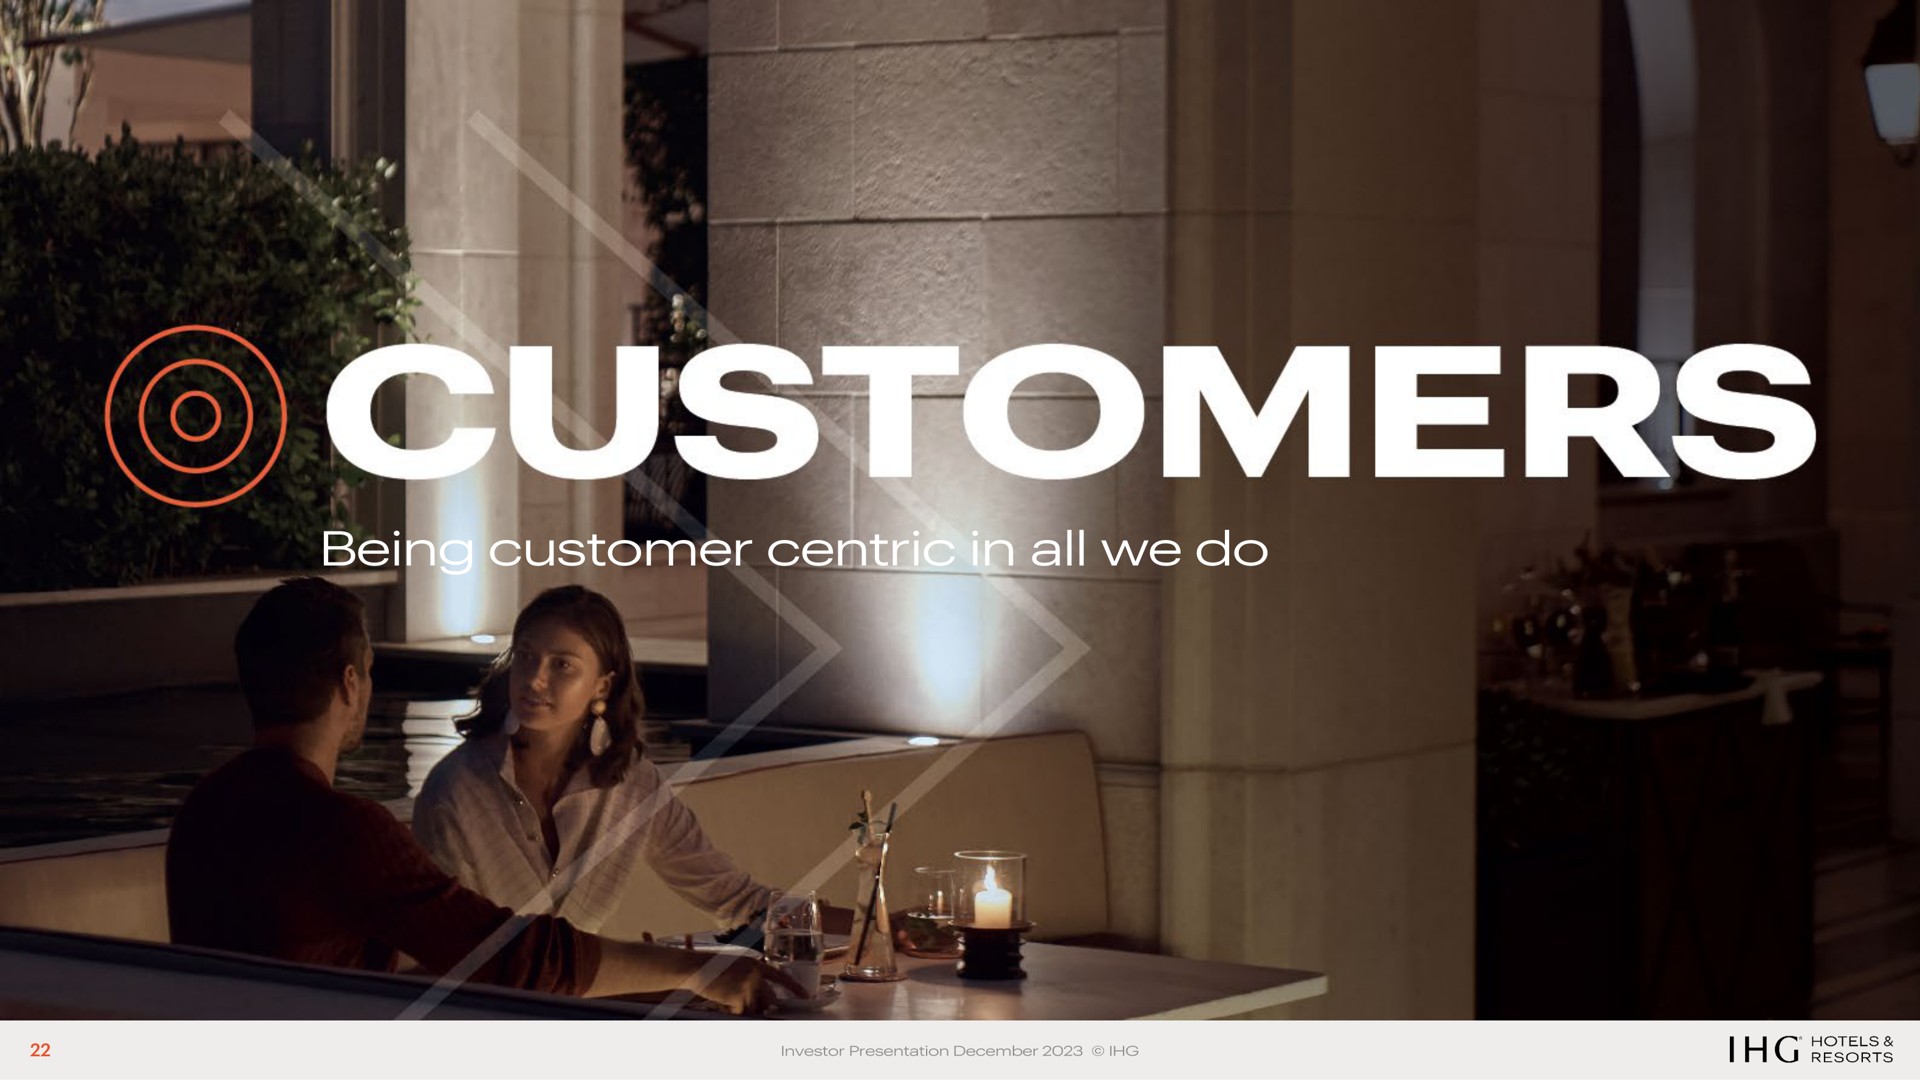 being customer centric in all we do | IHG Hotels